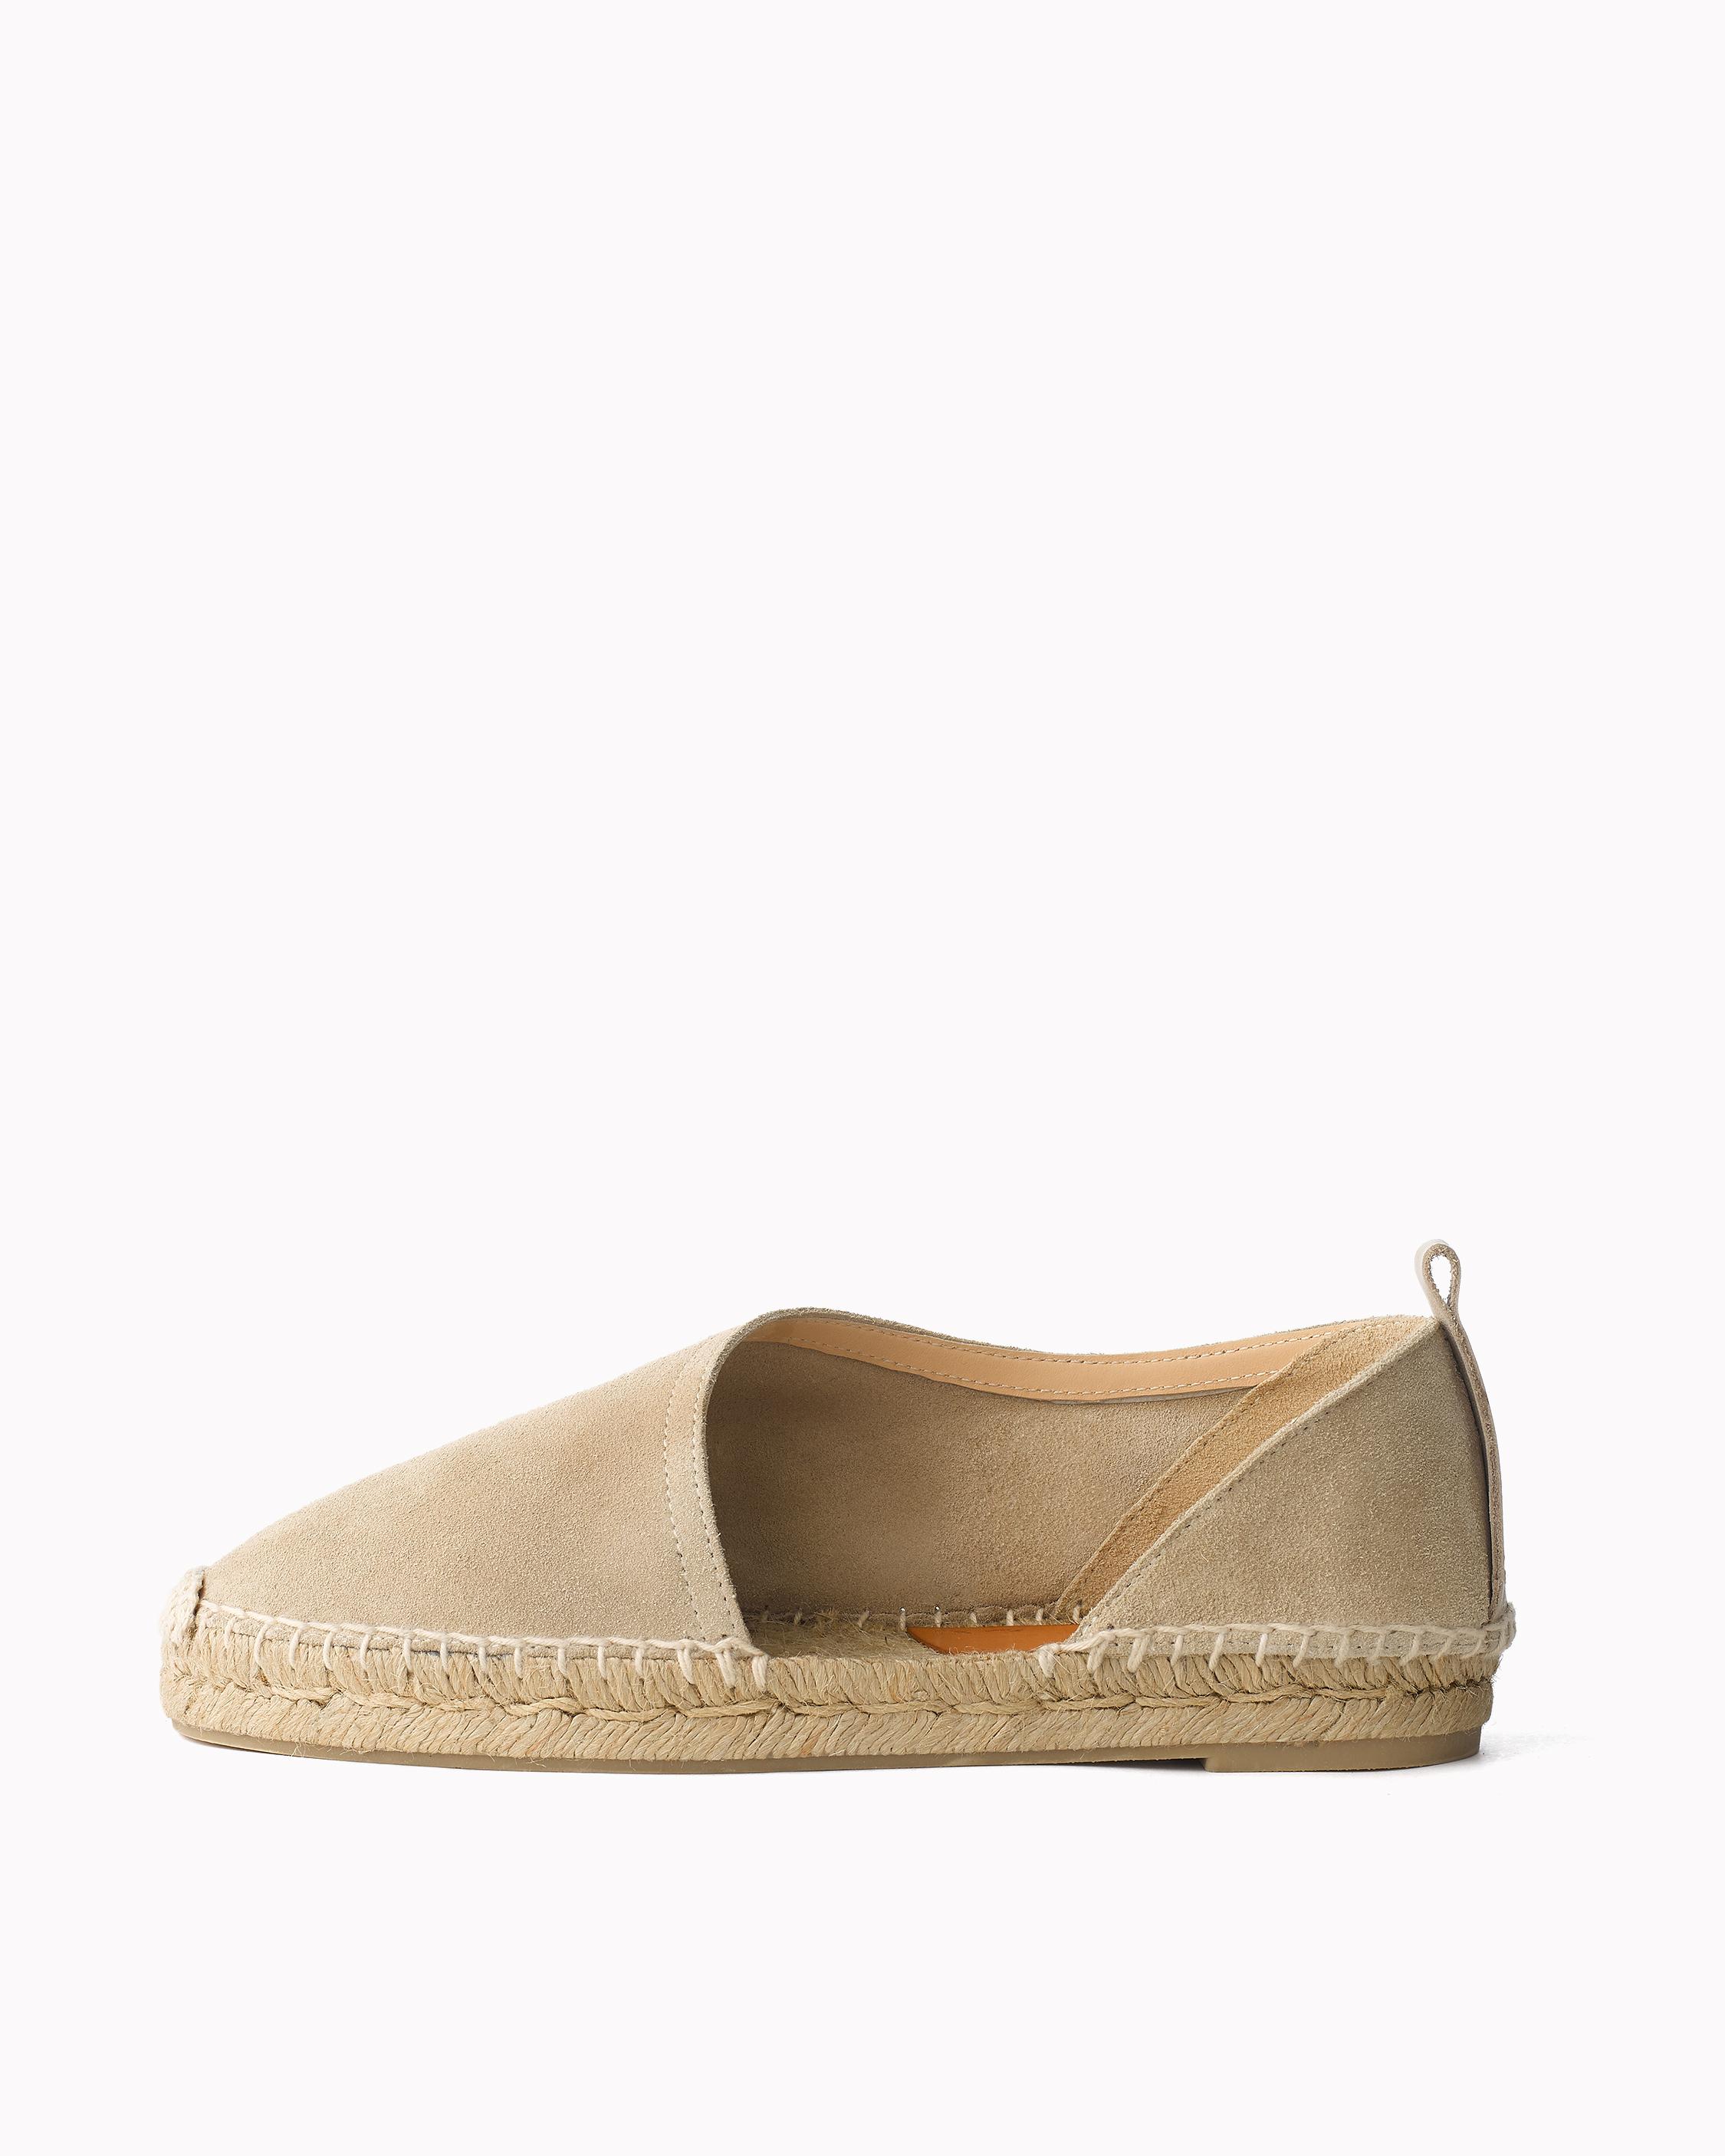 New Arrivals in Womens Clothing Shoes & Accessories | rag & bone